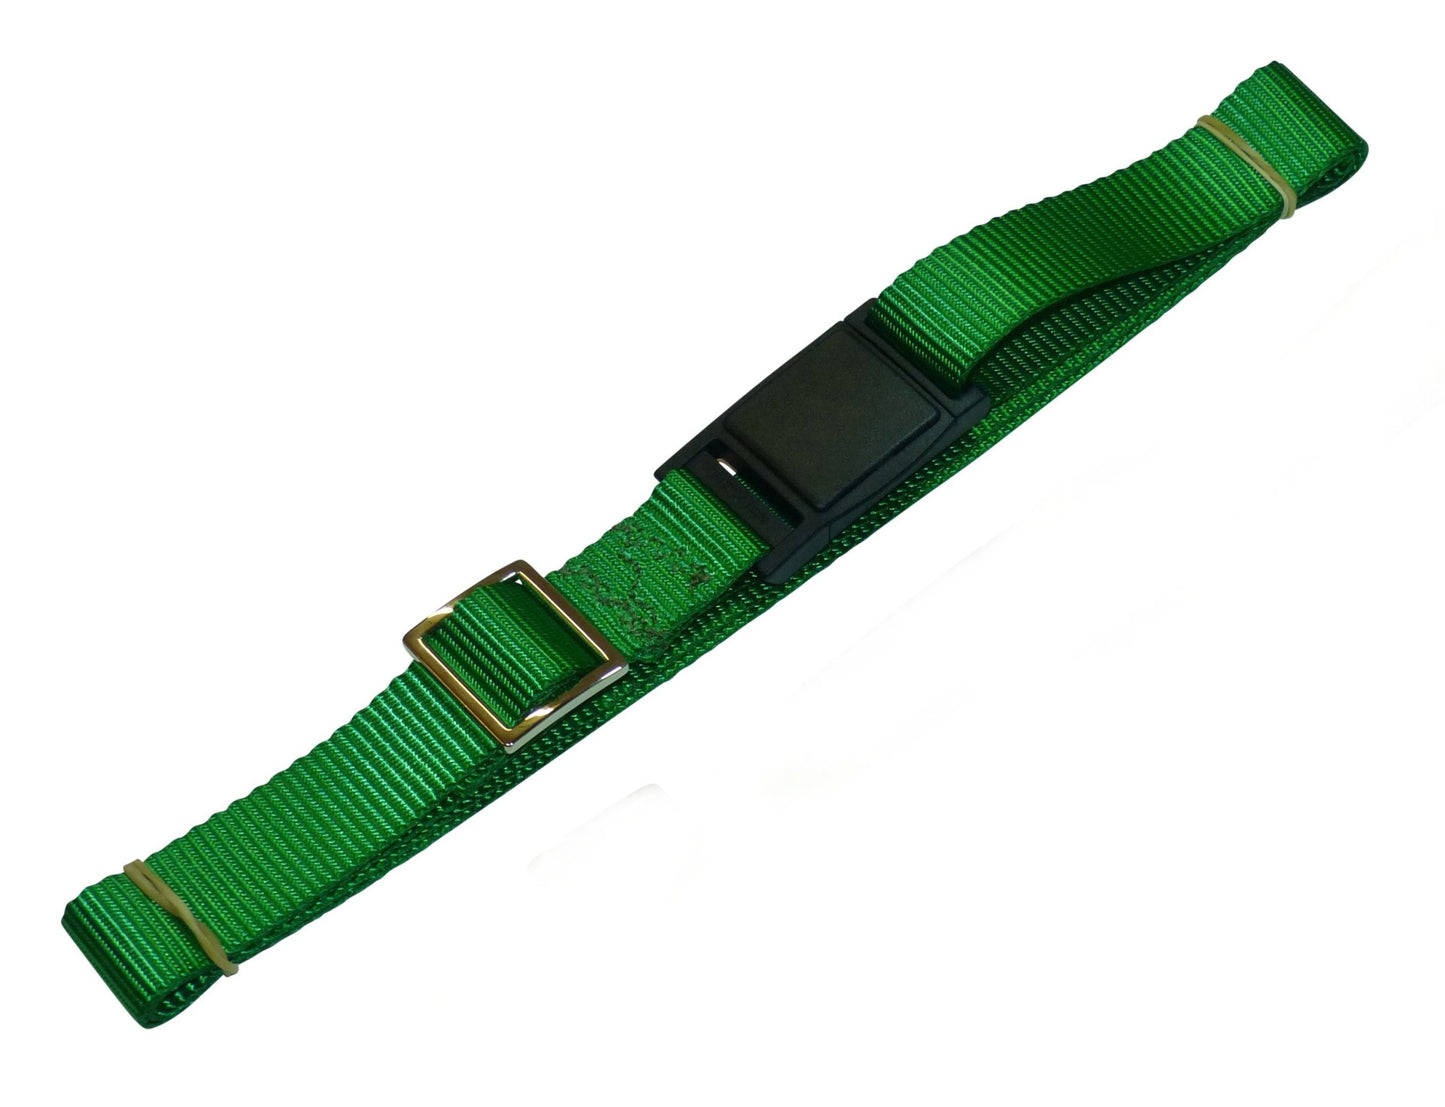 Benristraps 25mm Strap with Fidlock Quick Release & Length-Adjusting Buckles (Pair) in green